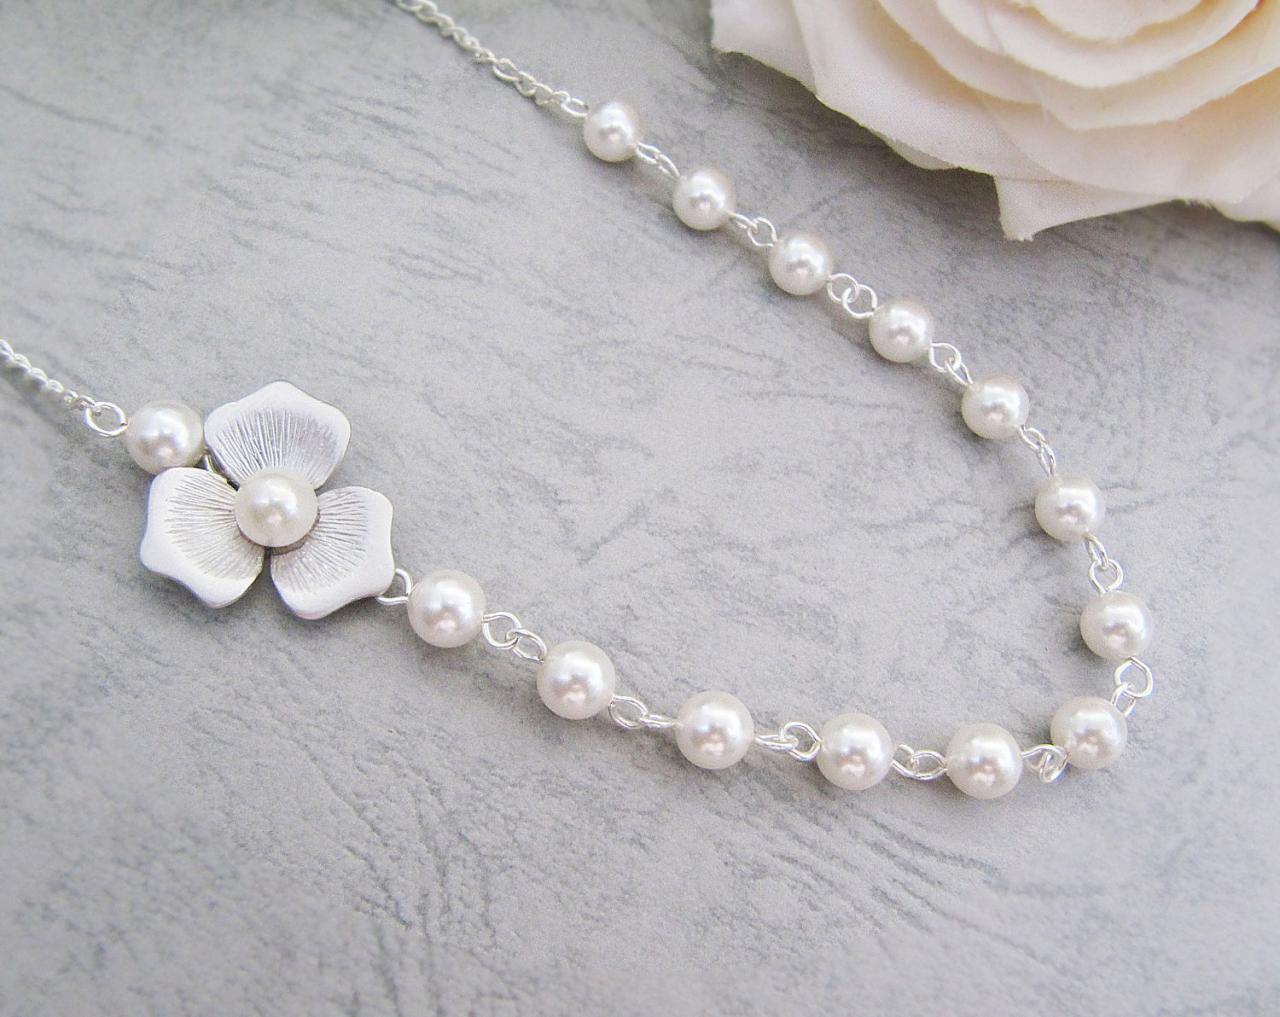 Matte Rodium Finish Flower Charm With Fresh Water Shell Pearl And Crystal White Swarovski Pearls Bridal Necklace